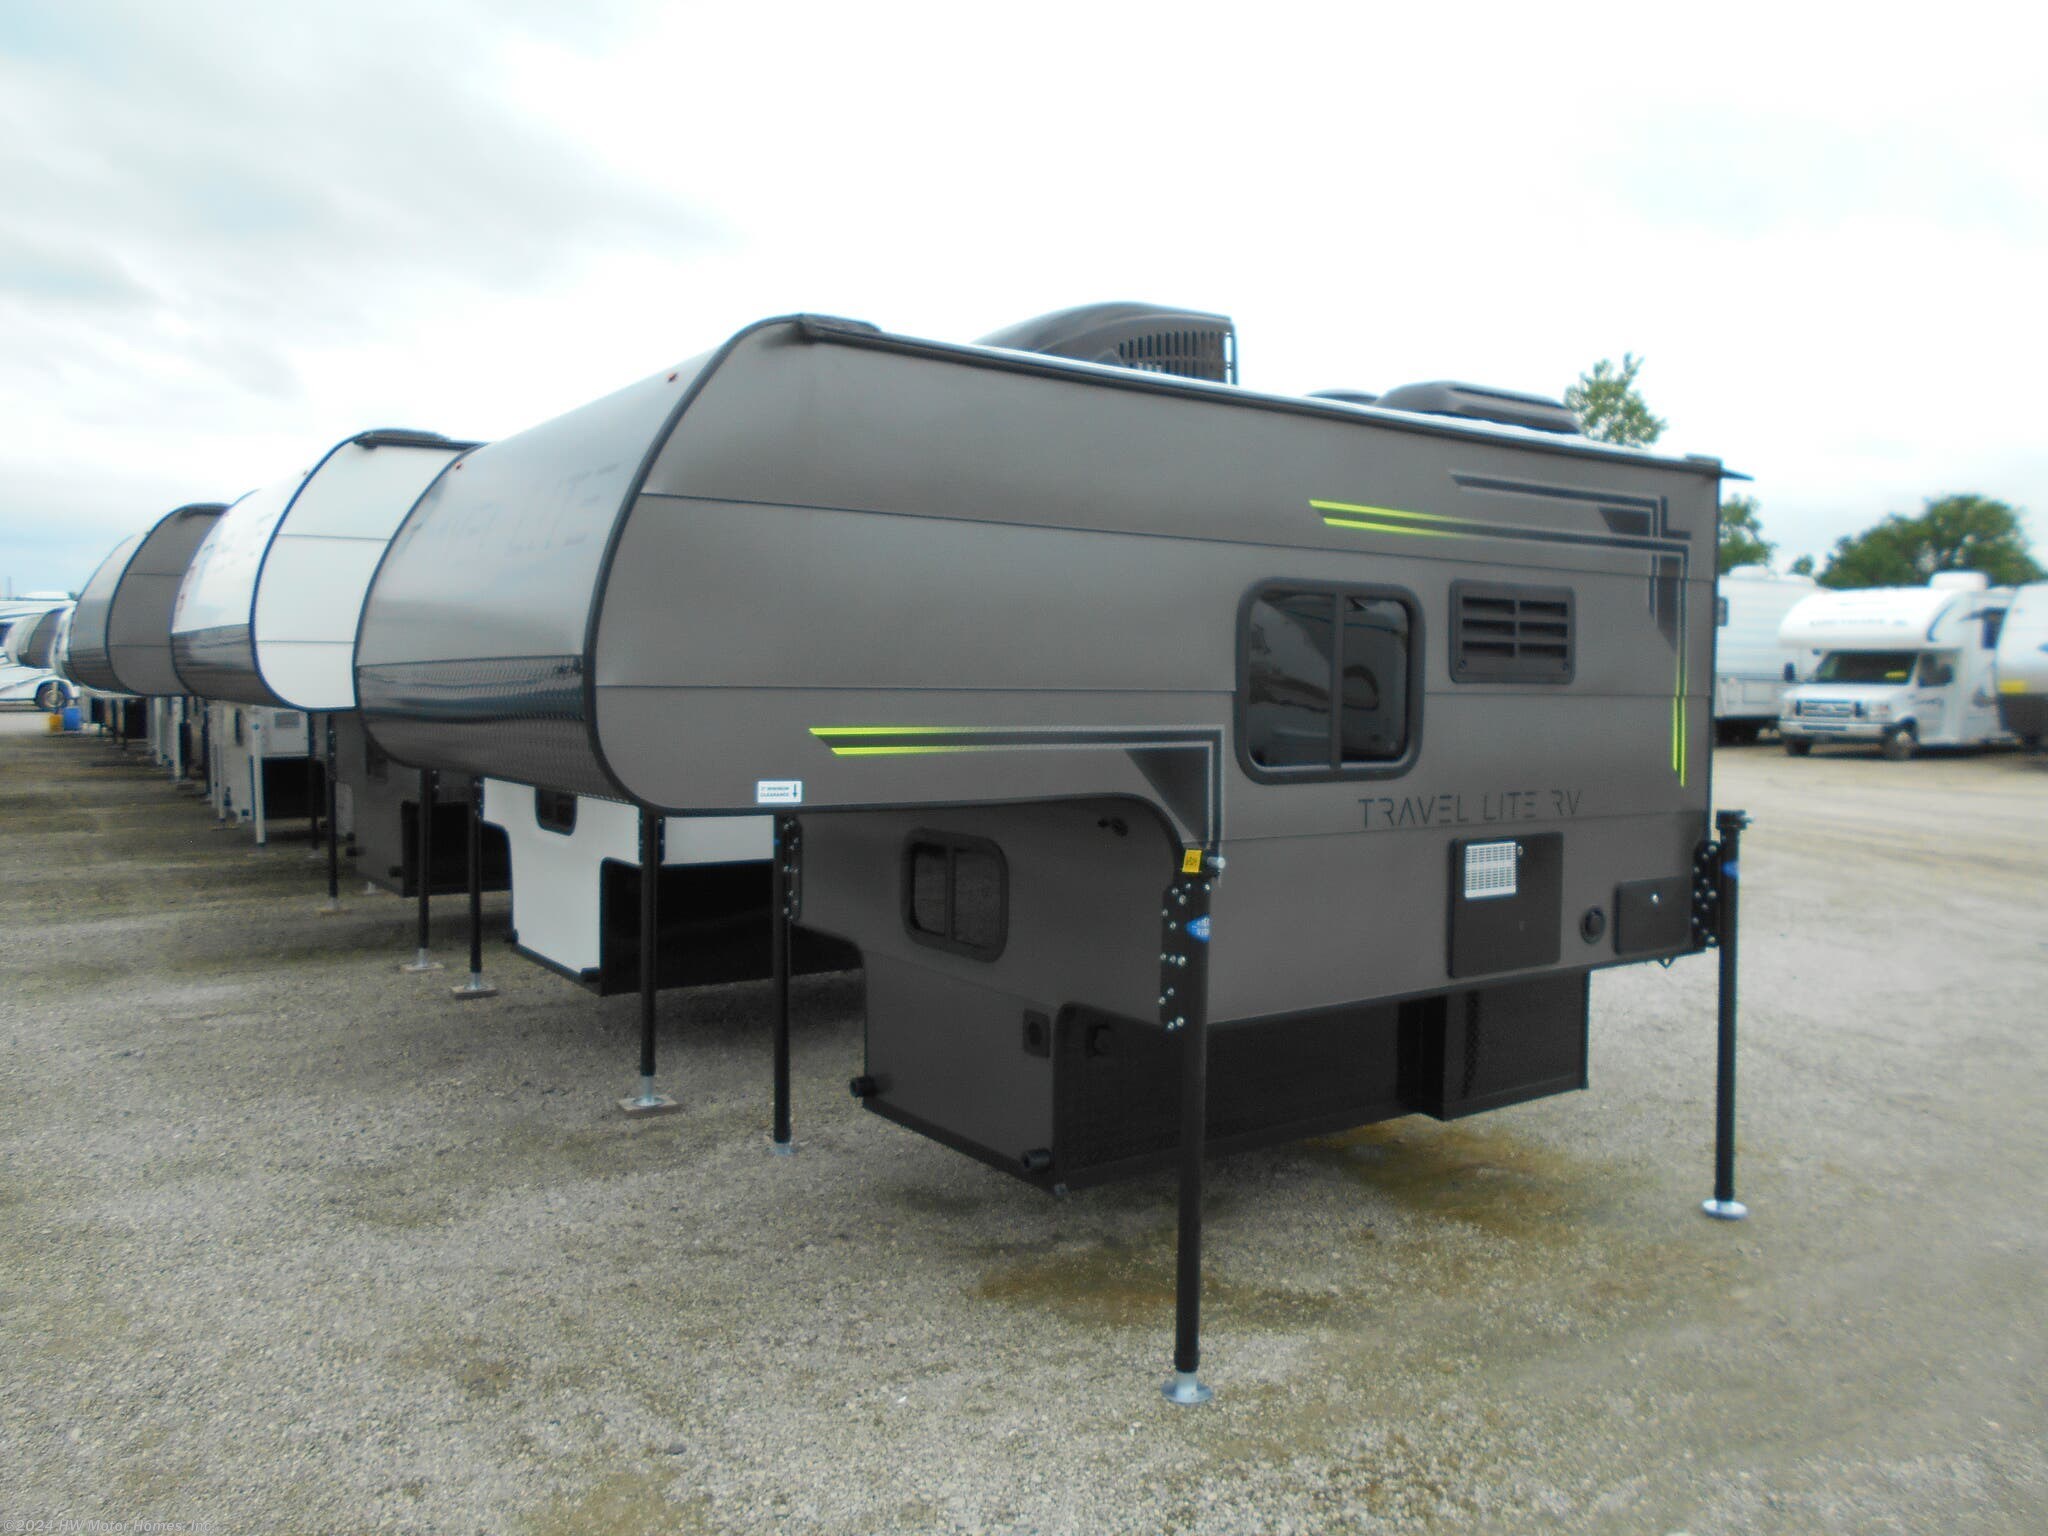 travel lite truck campers for sale near me